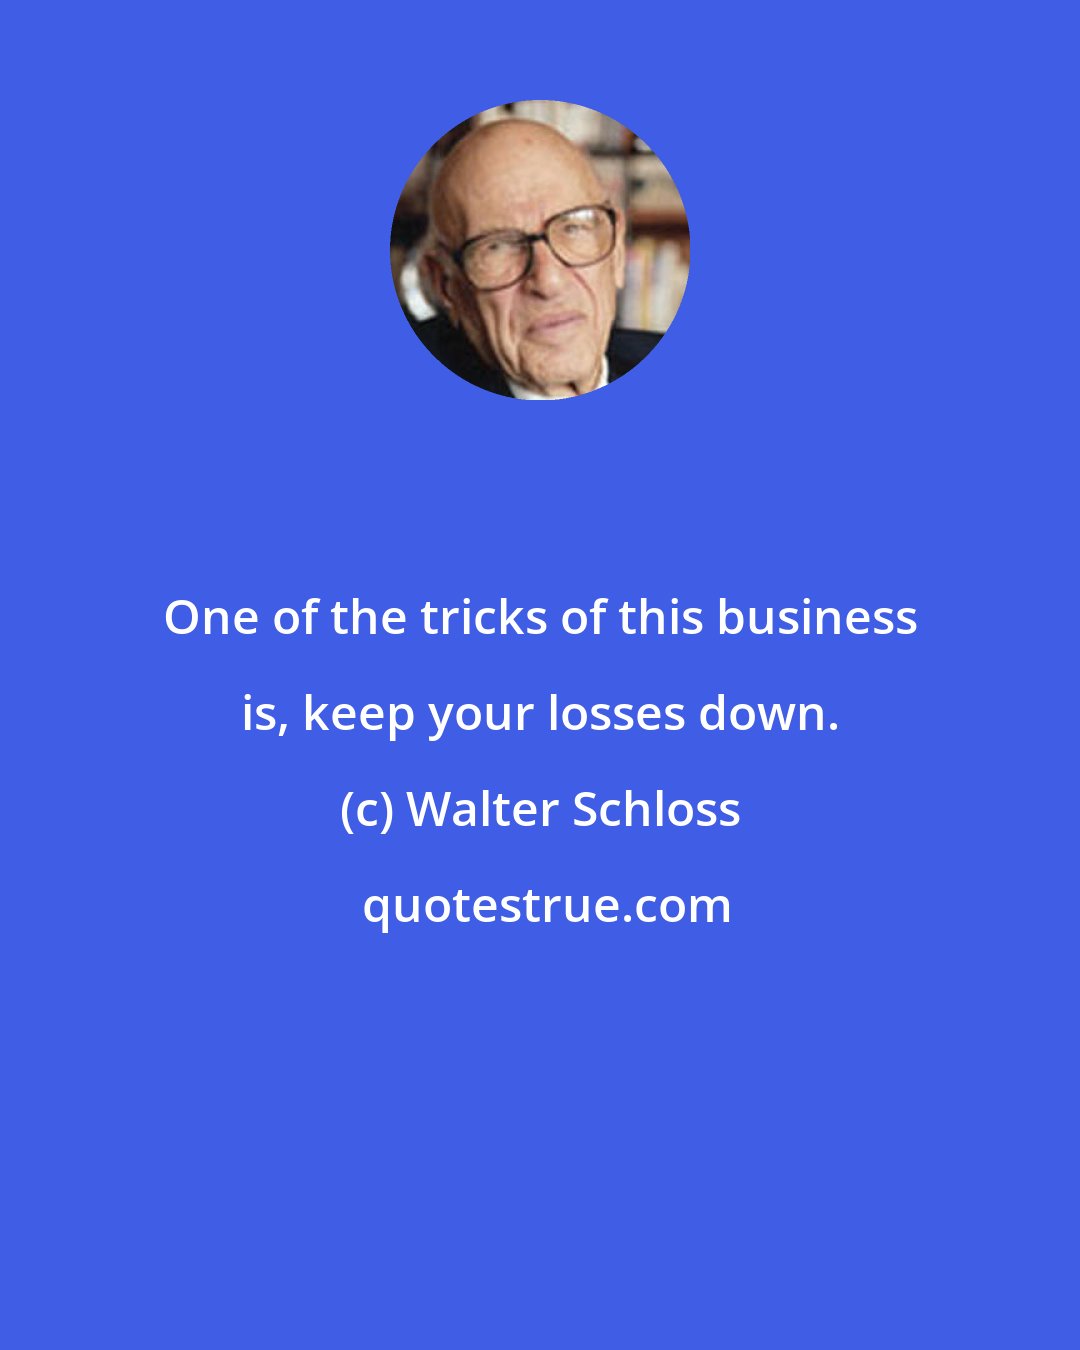 Walter Schloss: One of the tricks of this business is, keep your losses down.